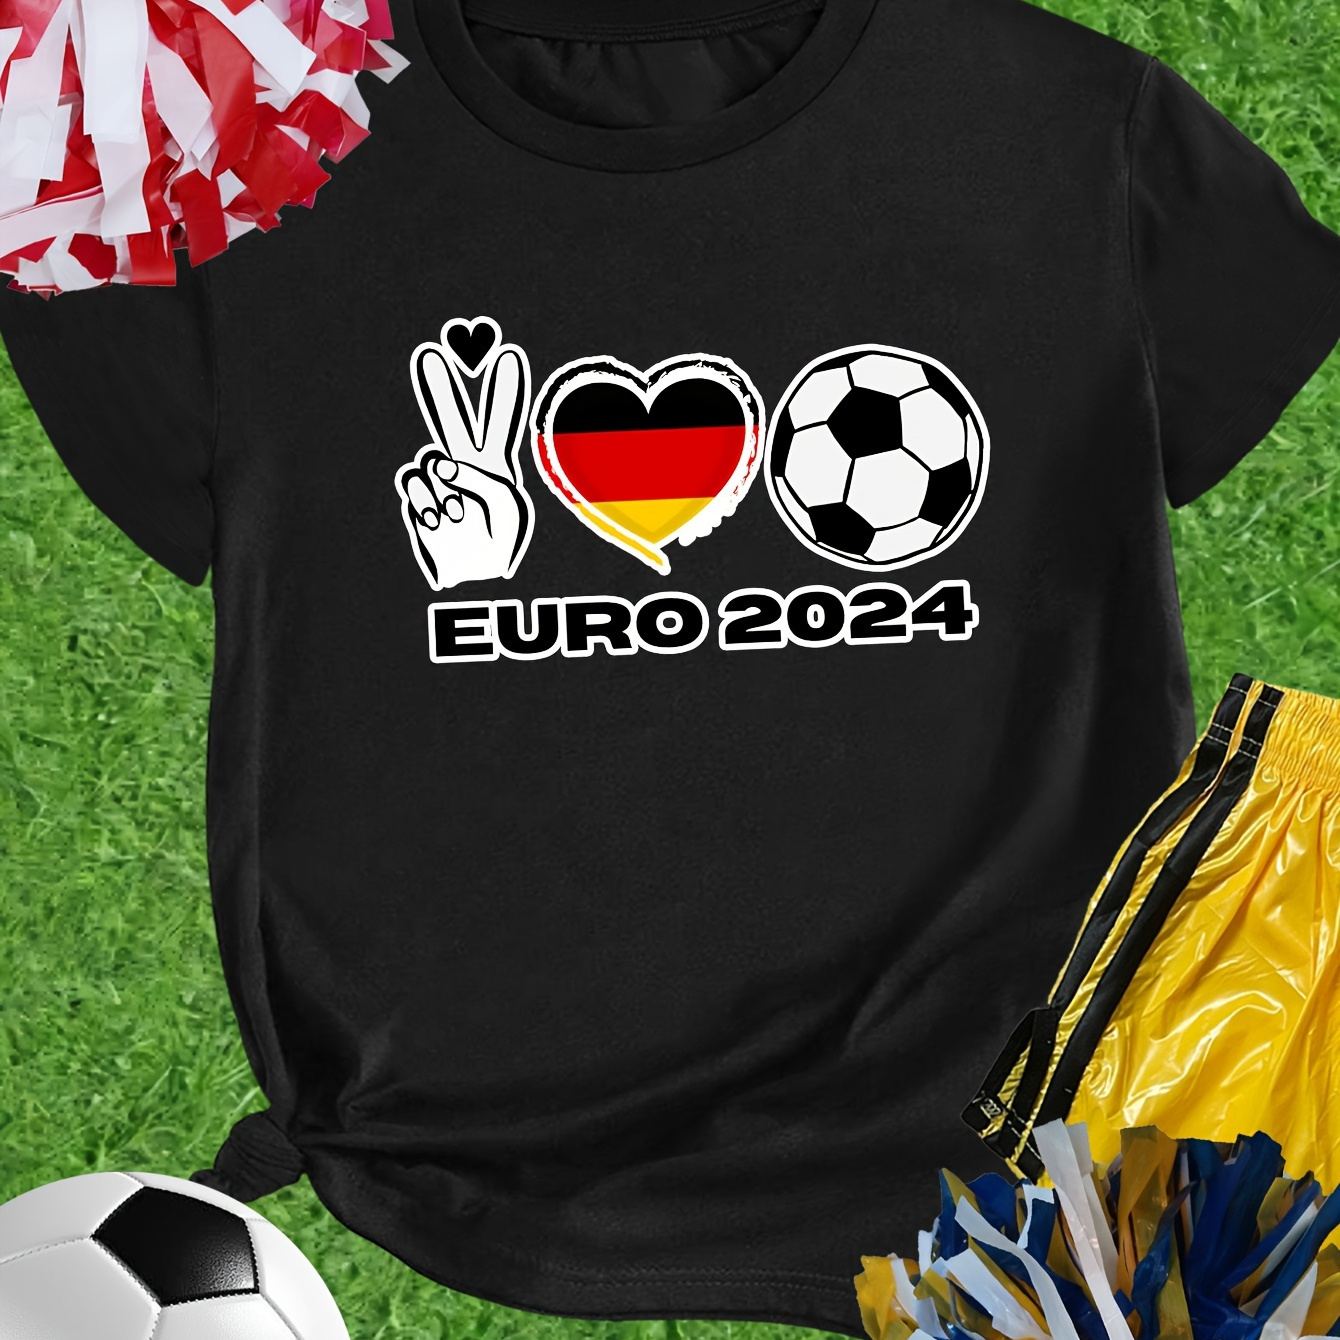 

Euro 2024 Football T-shirt, Tee With Germany Heartbeat Love And Soccer Design, Casual Sportswear For Fans